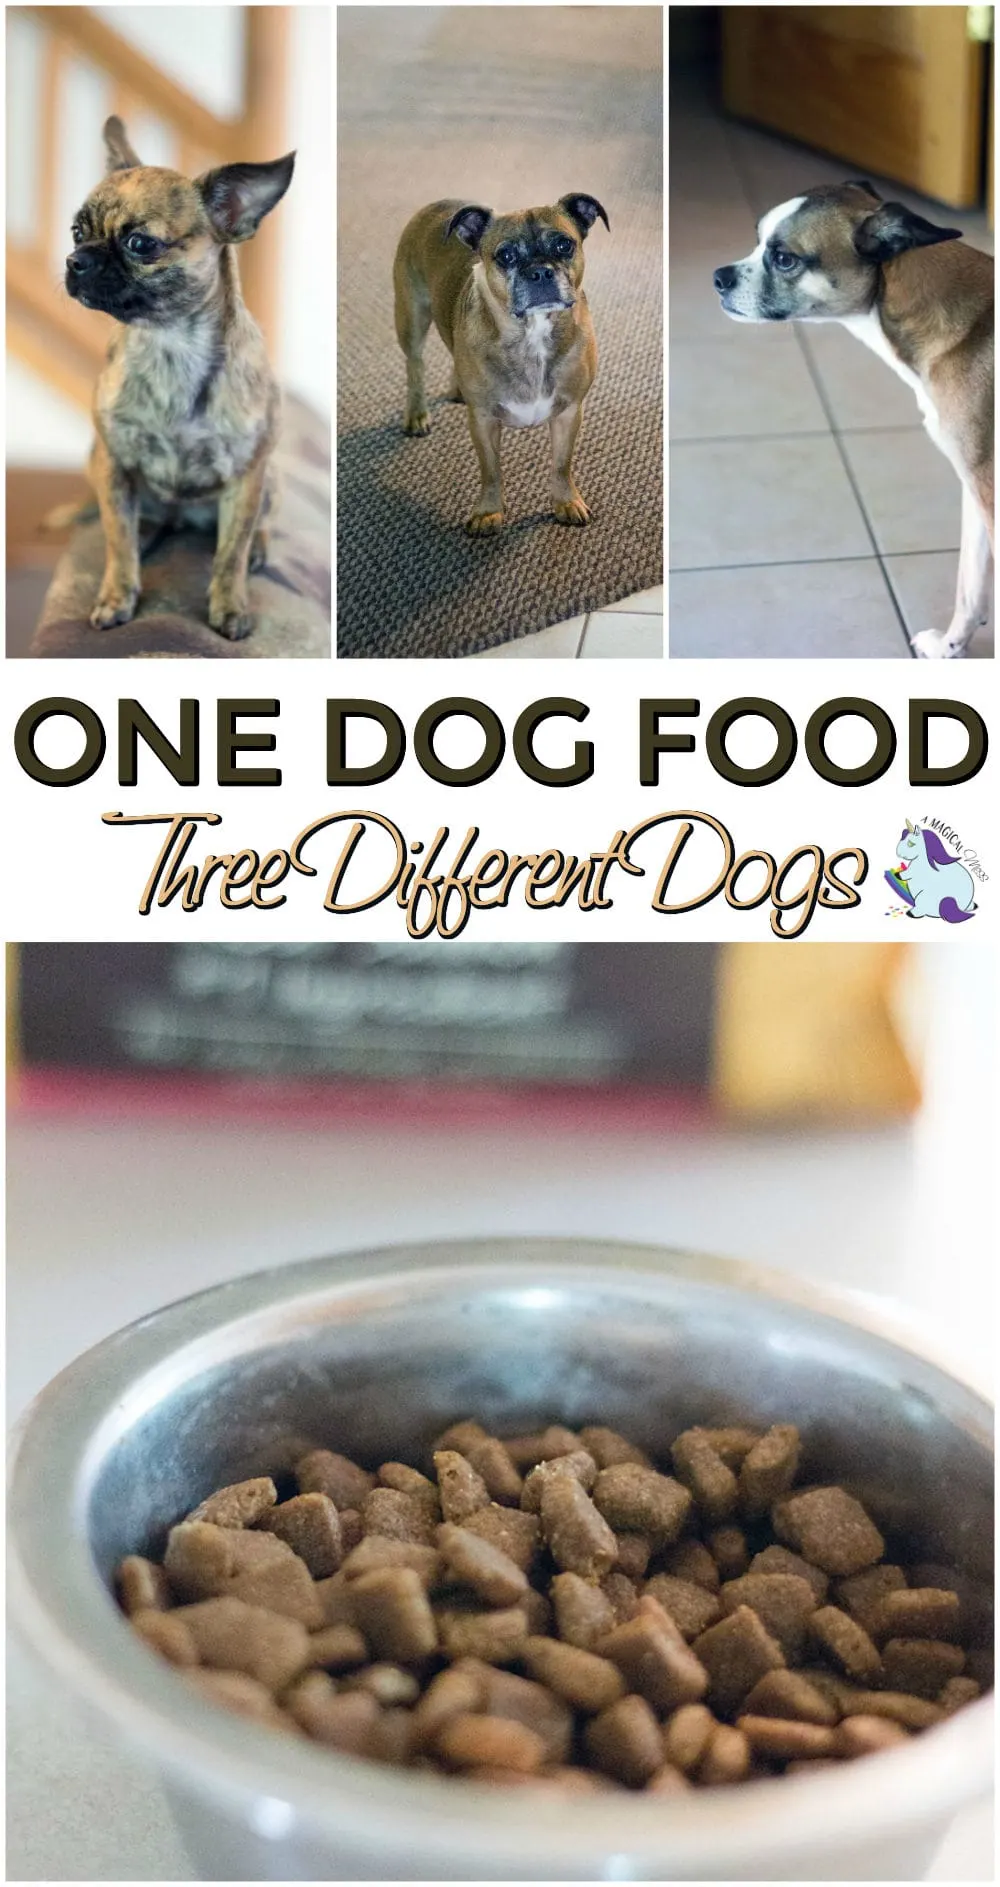 Easy to Find Healthy Dog Foods for Multiple Dogs